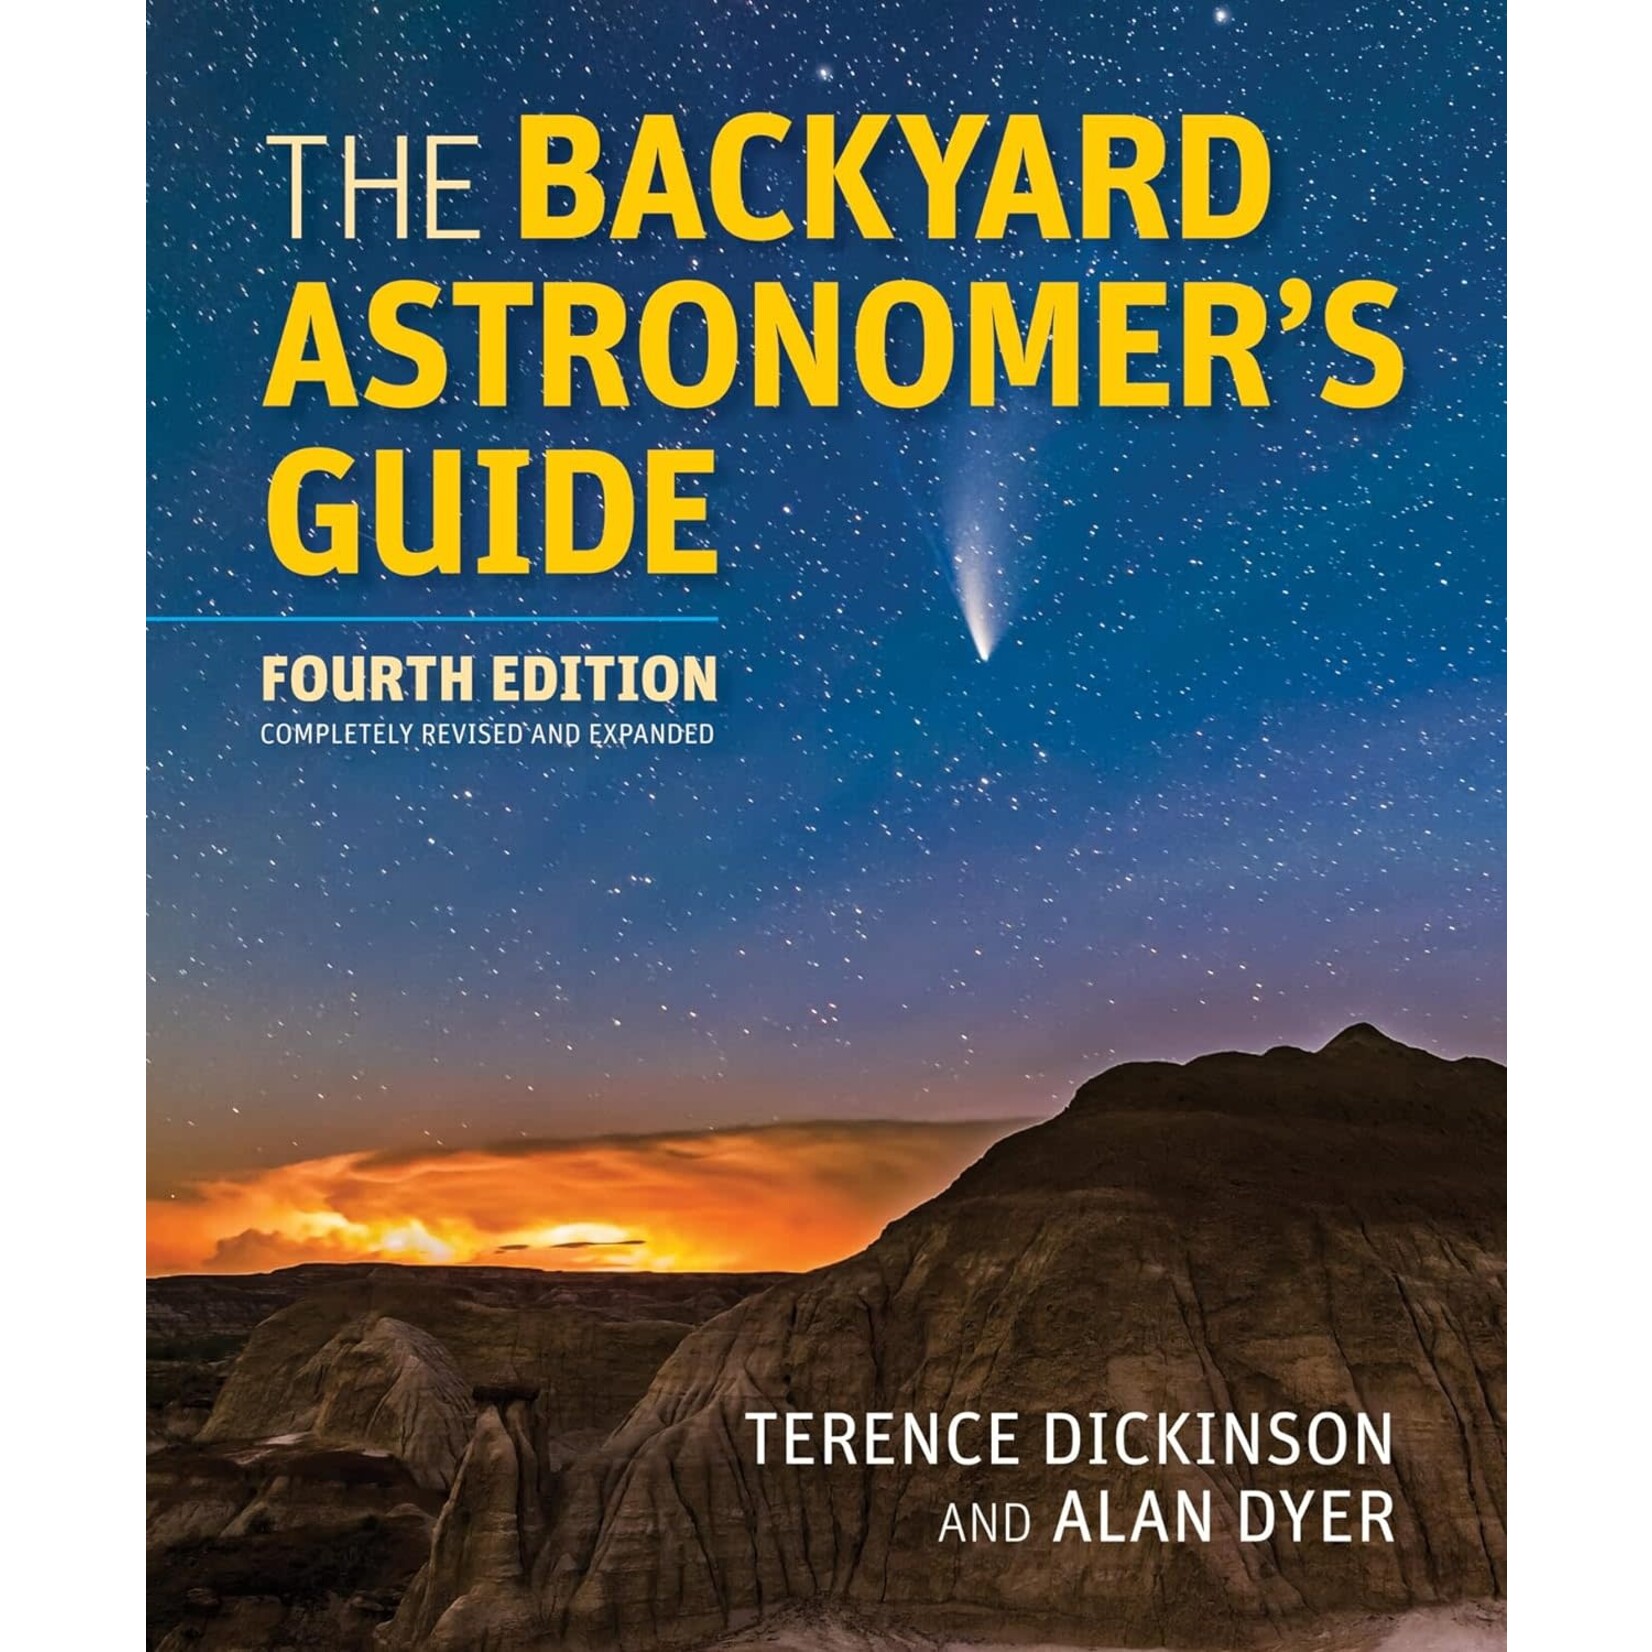 The Backyard Astronomer's Guide (4th Edition)